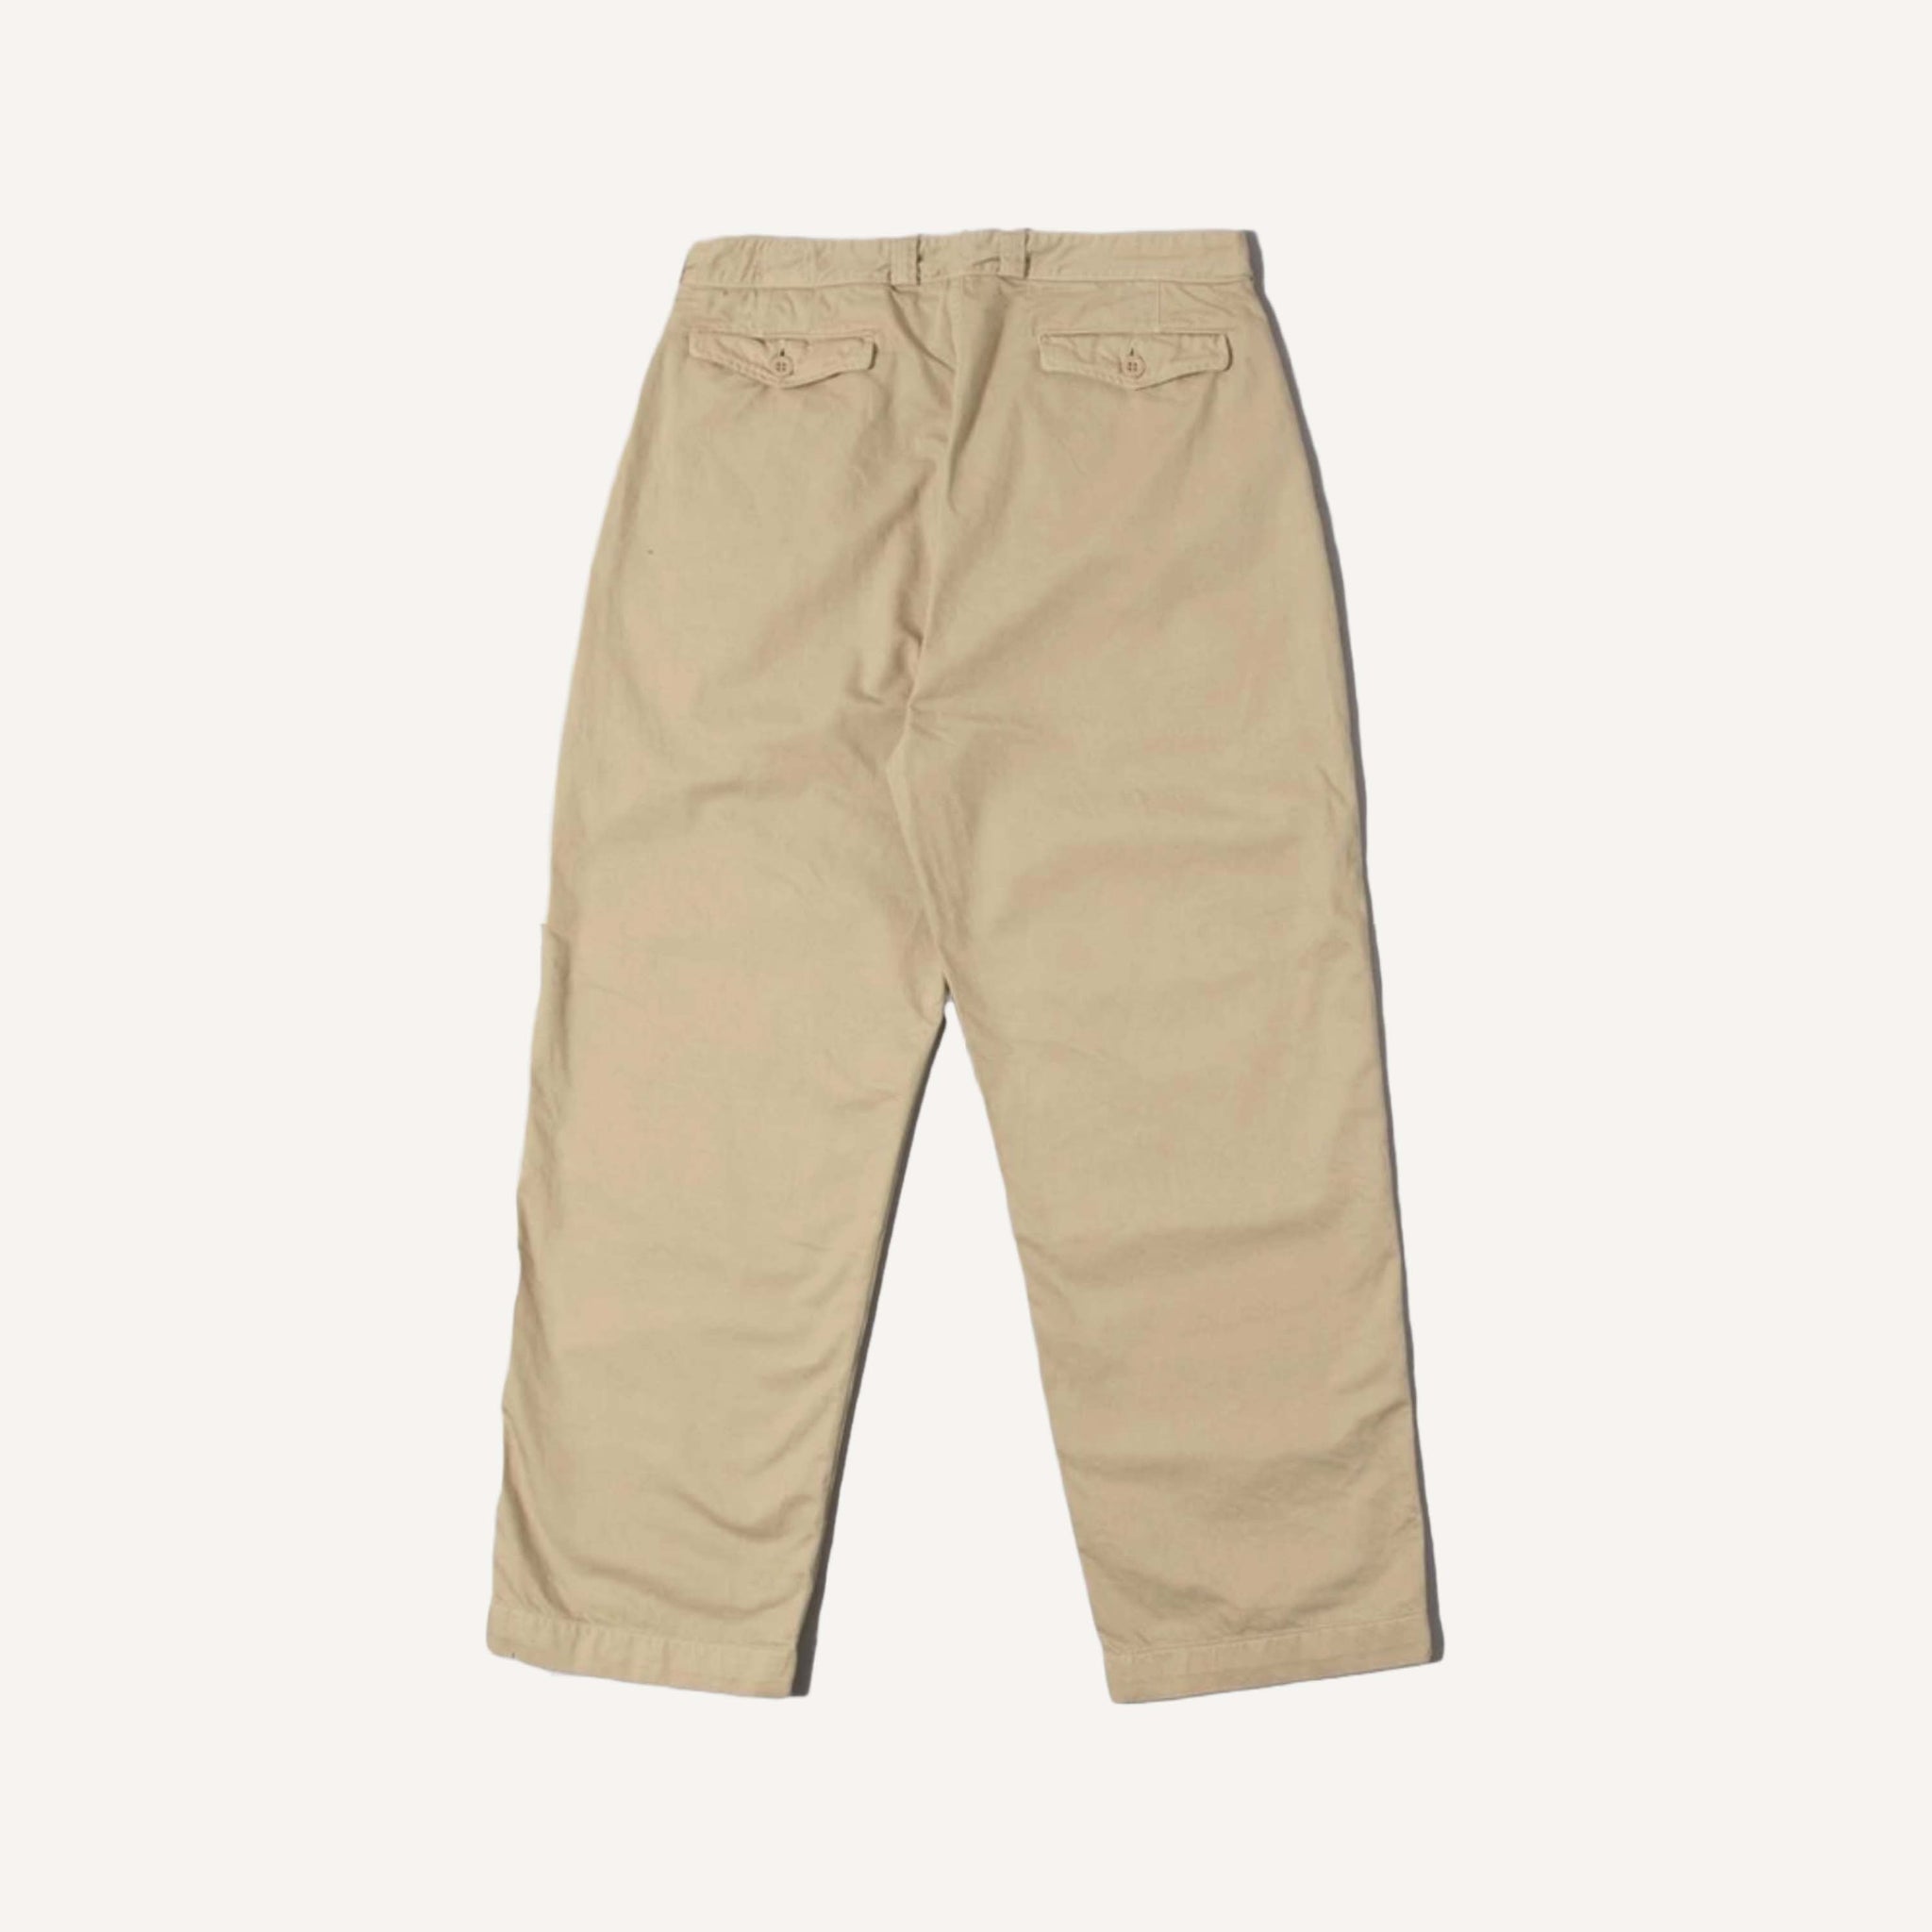 ORSLOW FRENCH ARMY CHINOS